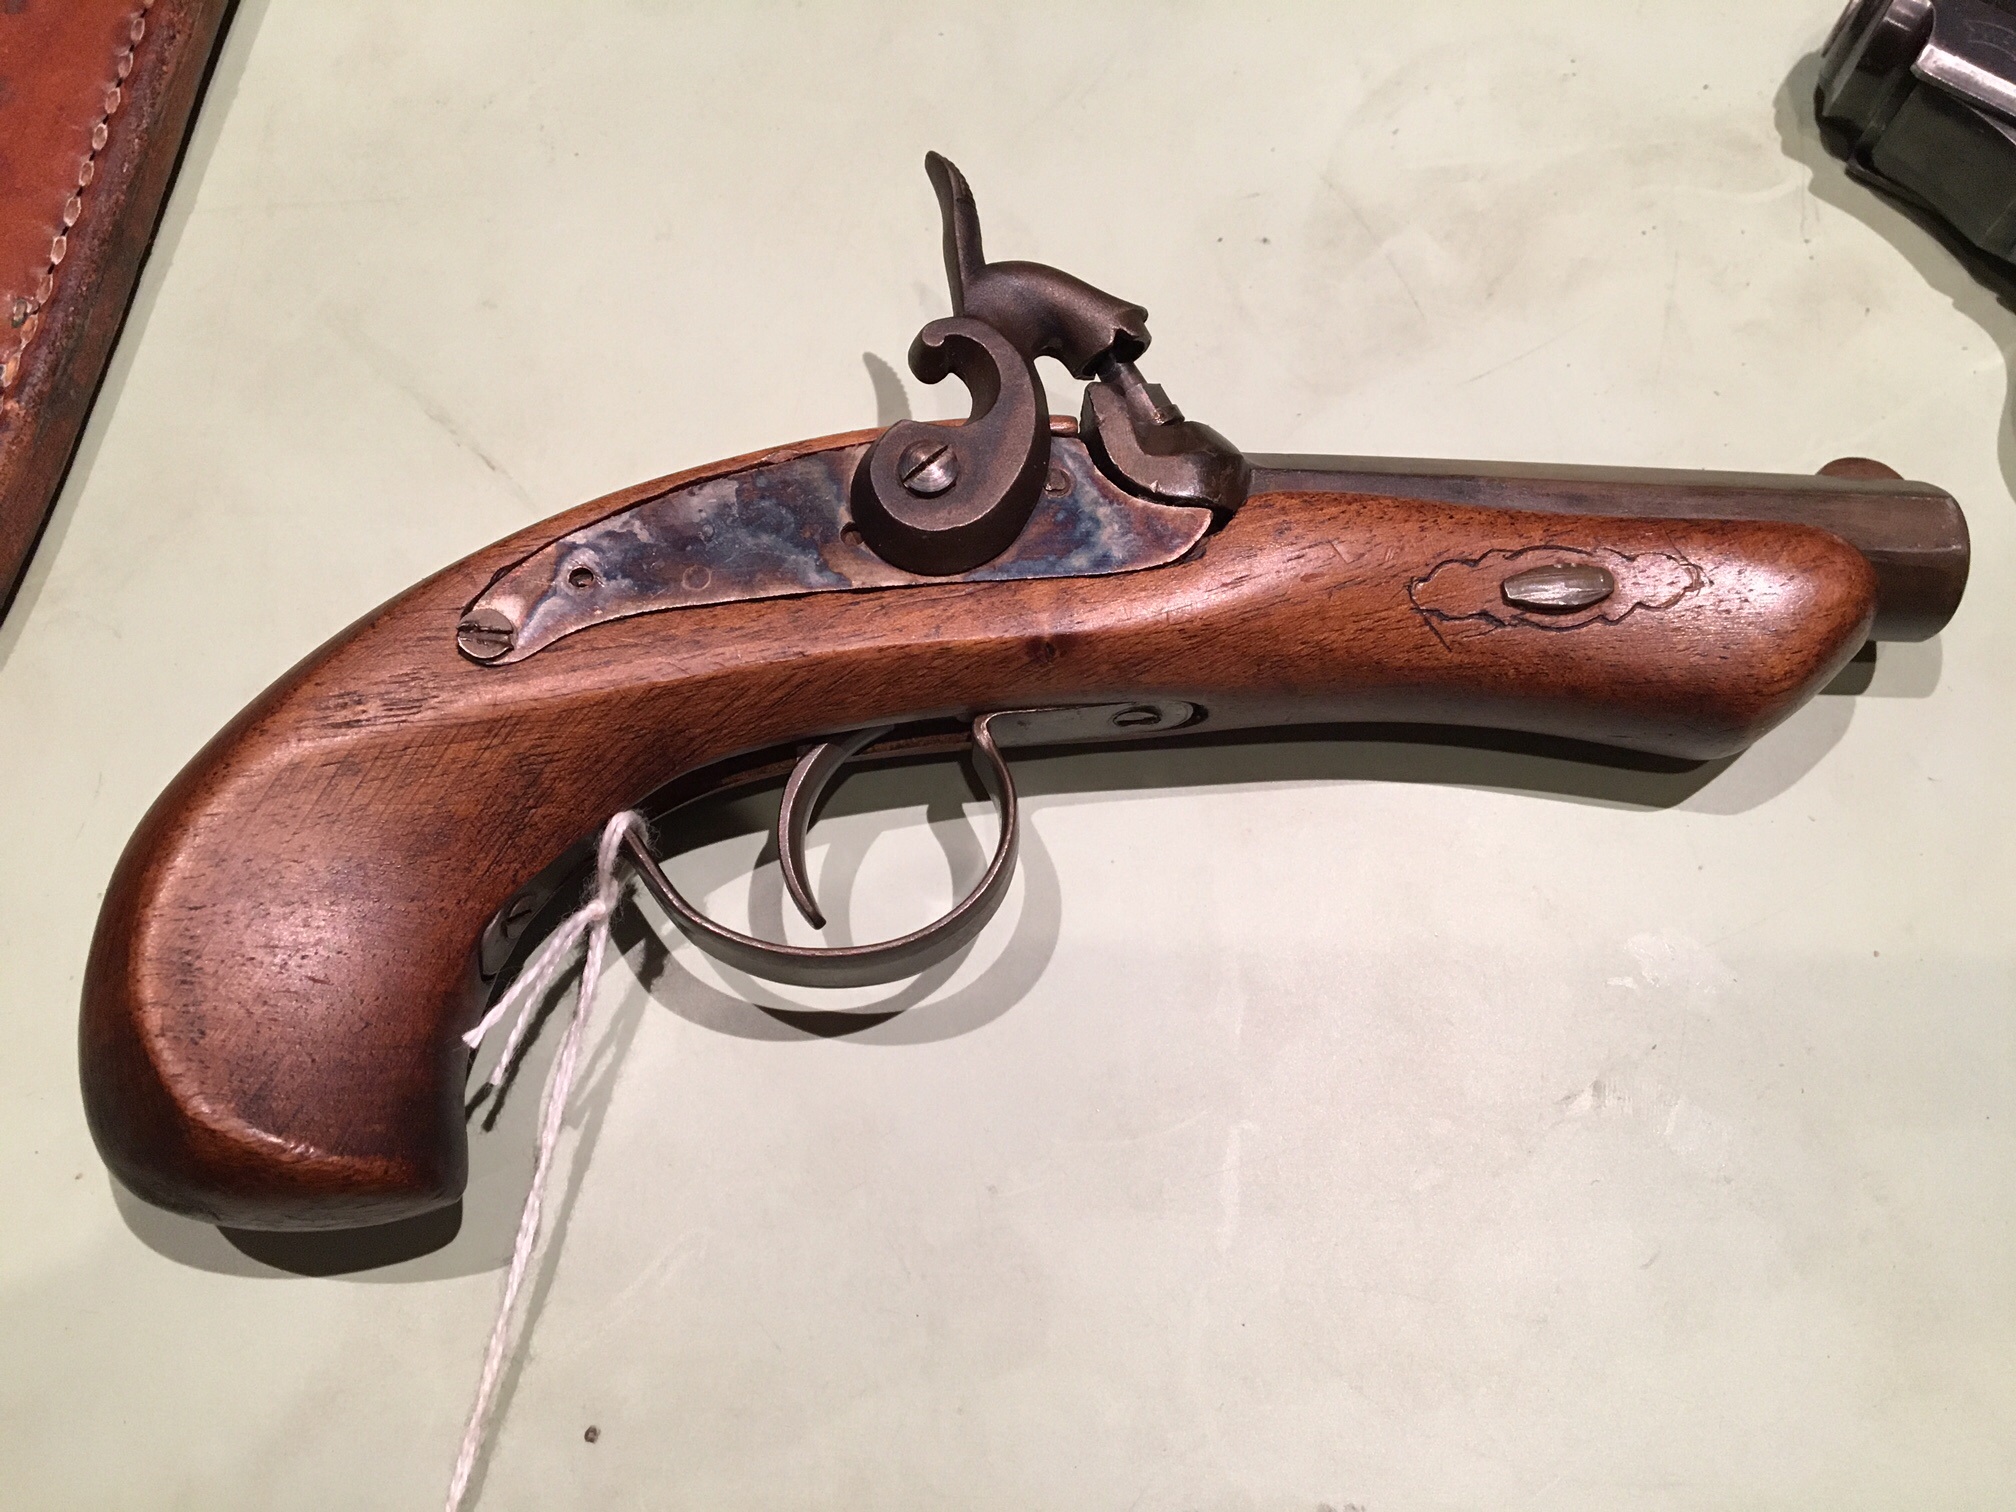 Help identifying these OLD pistols | The Firearms Forum - The Buying ...